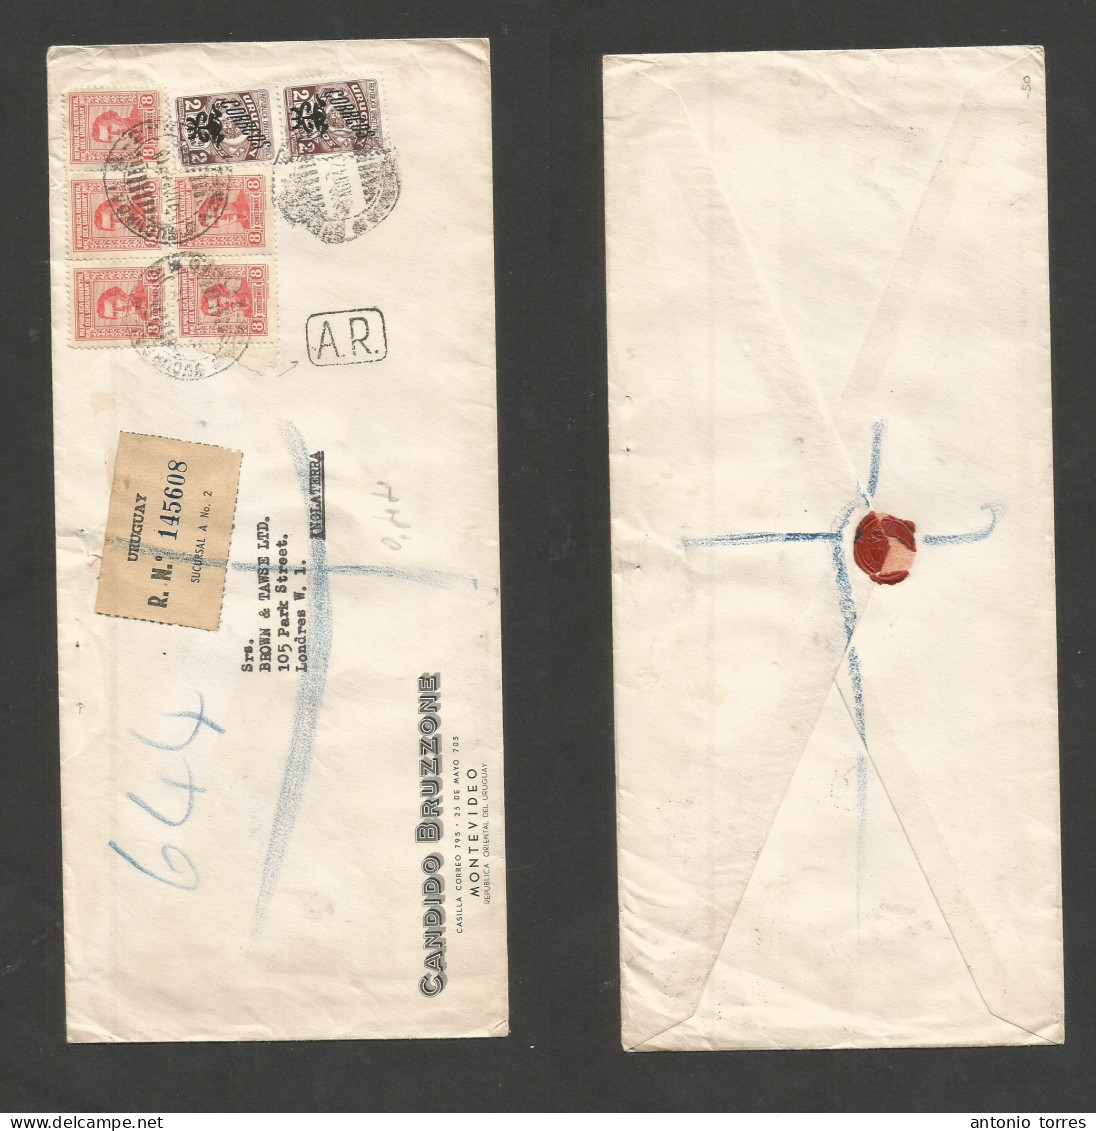 Uruguay. 1947 (10 Aug) Montevideo. UK, London. Registered Air Multifkd Envelope, Mixed Issues Tied Cds + R-label. Fine. - Uruguay